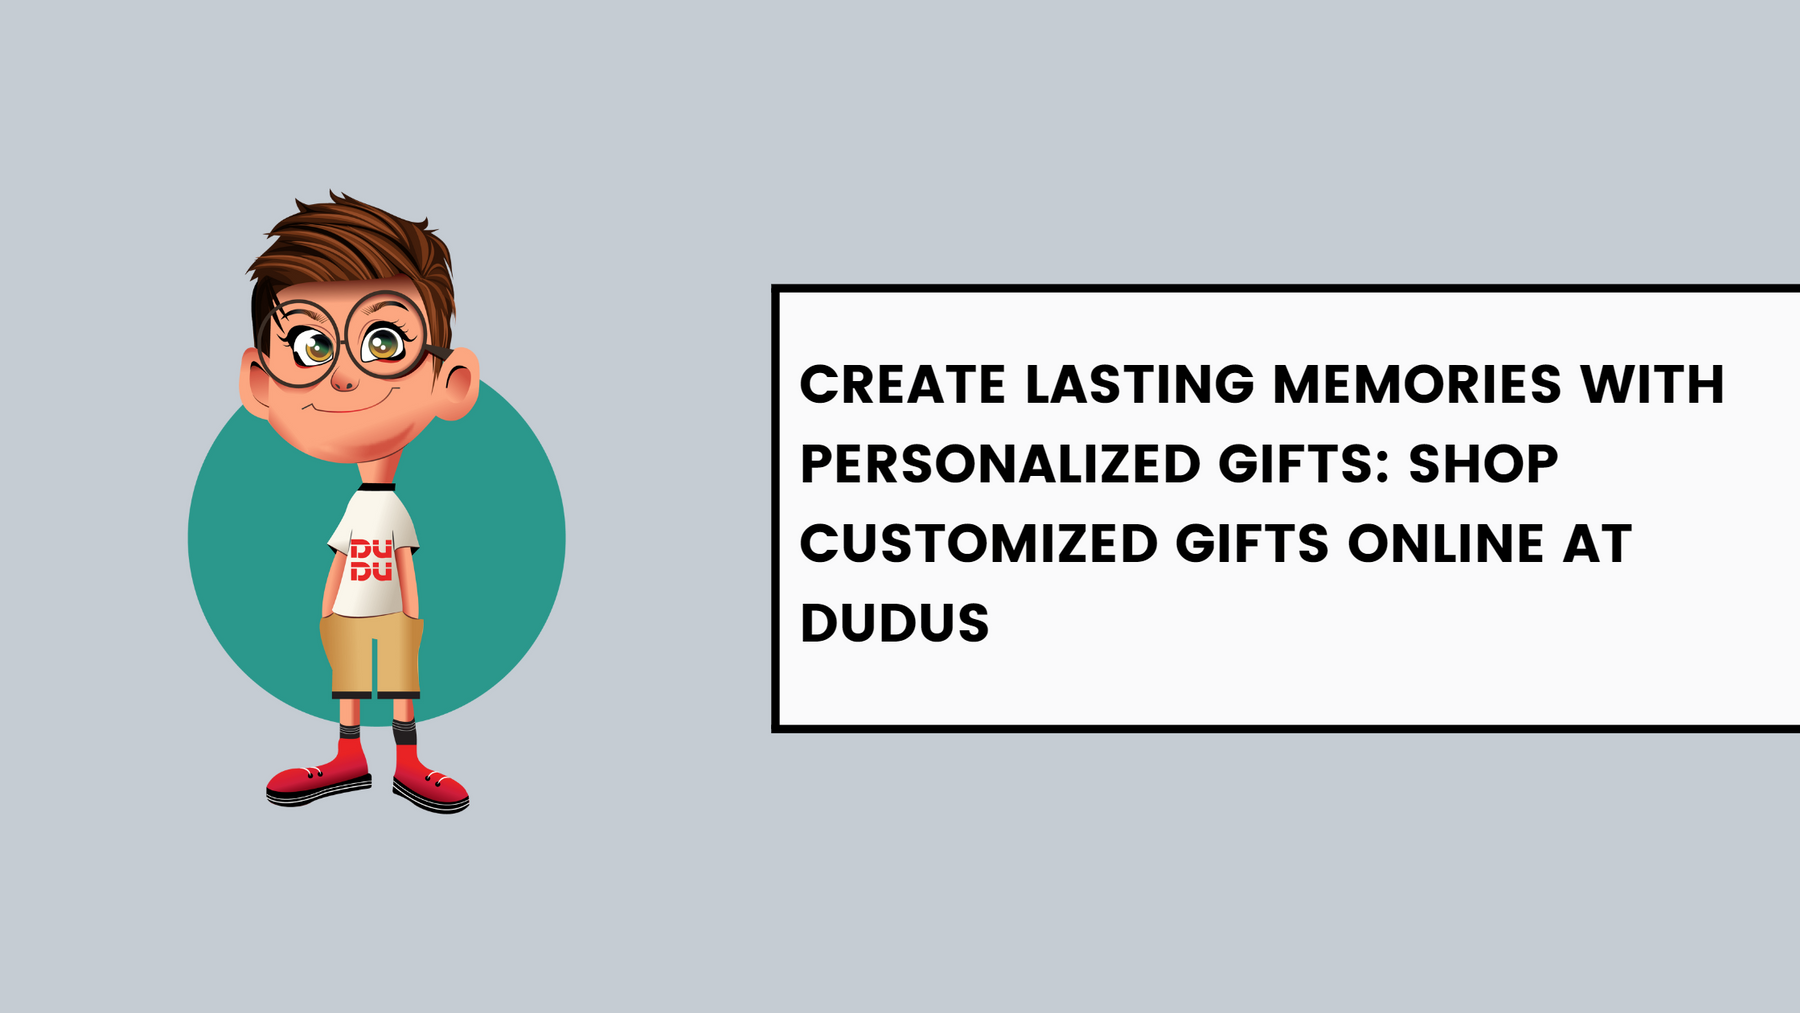 Create Lasting Memories with Personalized Gifts: Shop Customized Gifts Online at Dudus